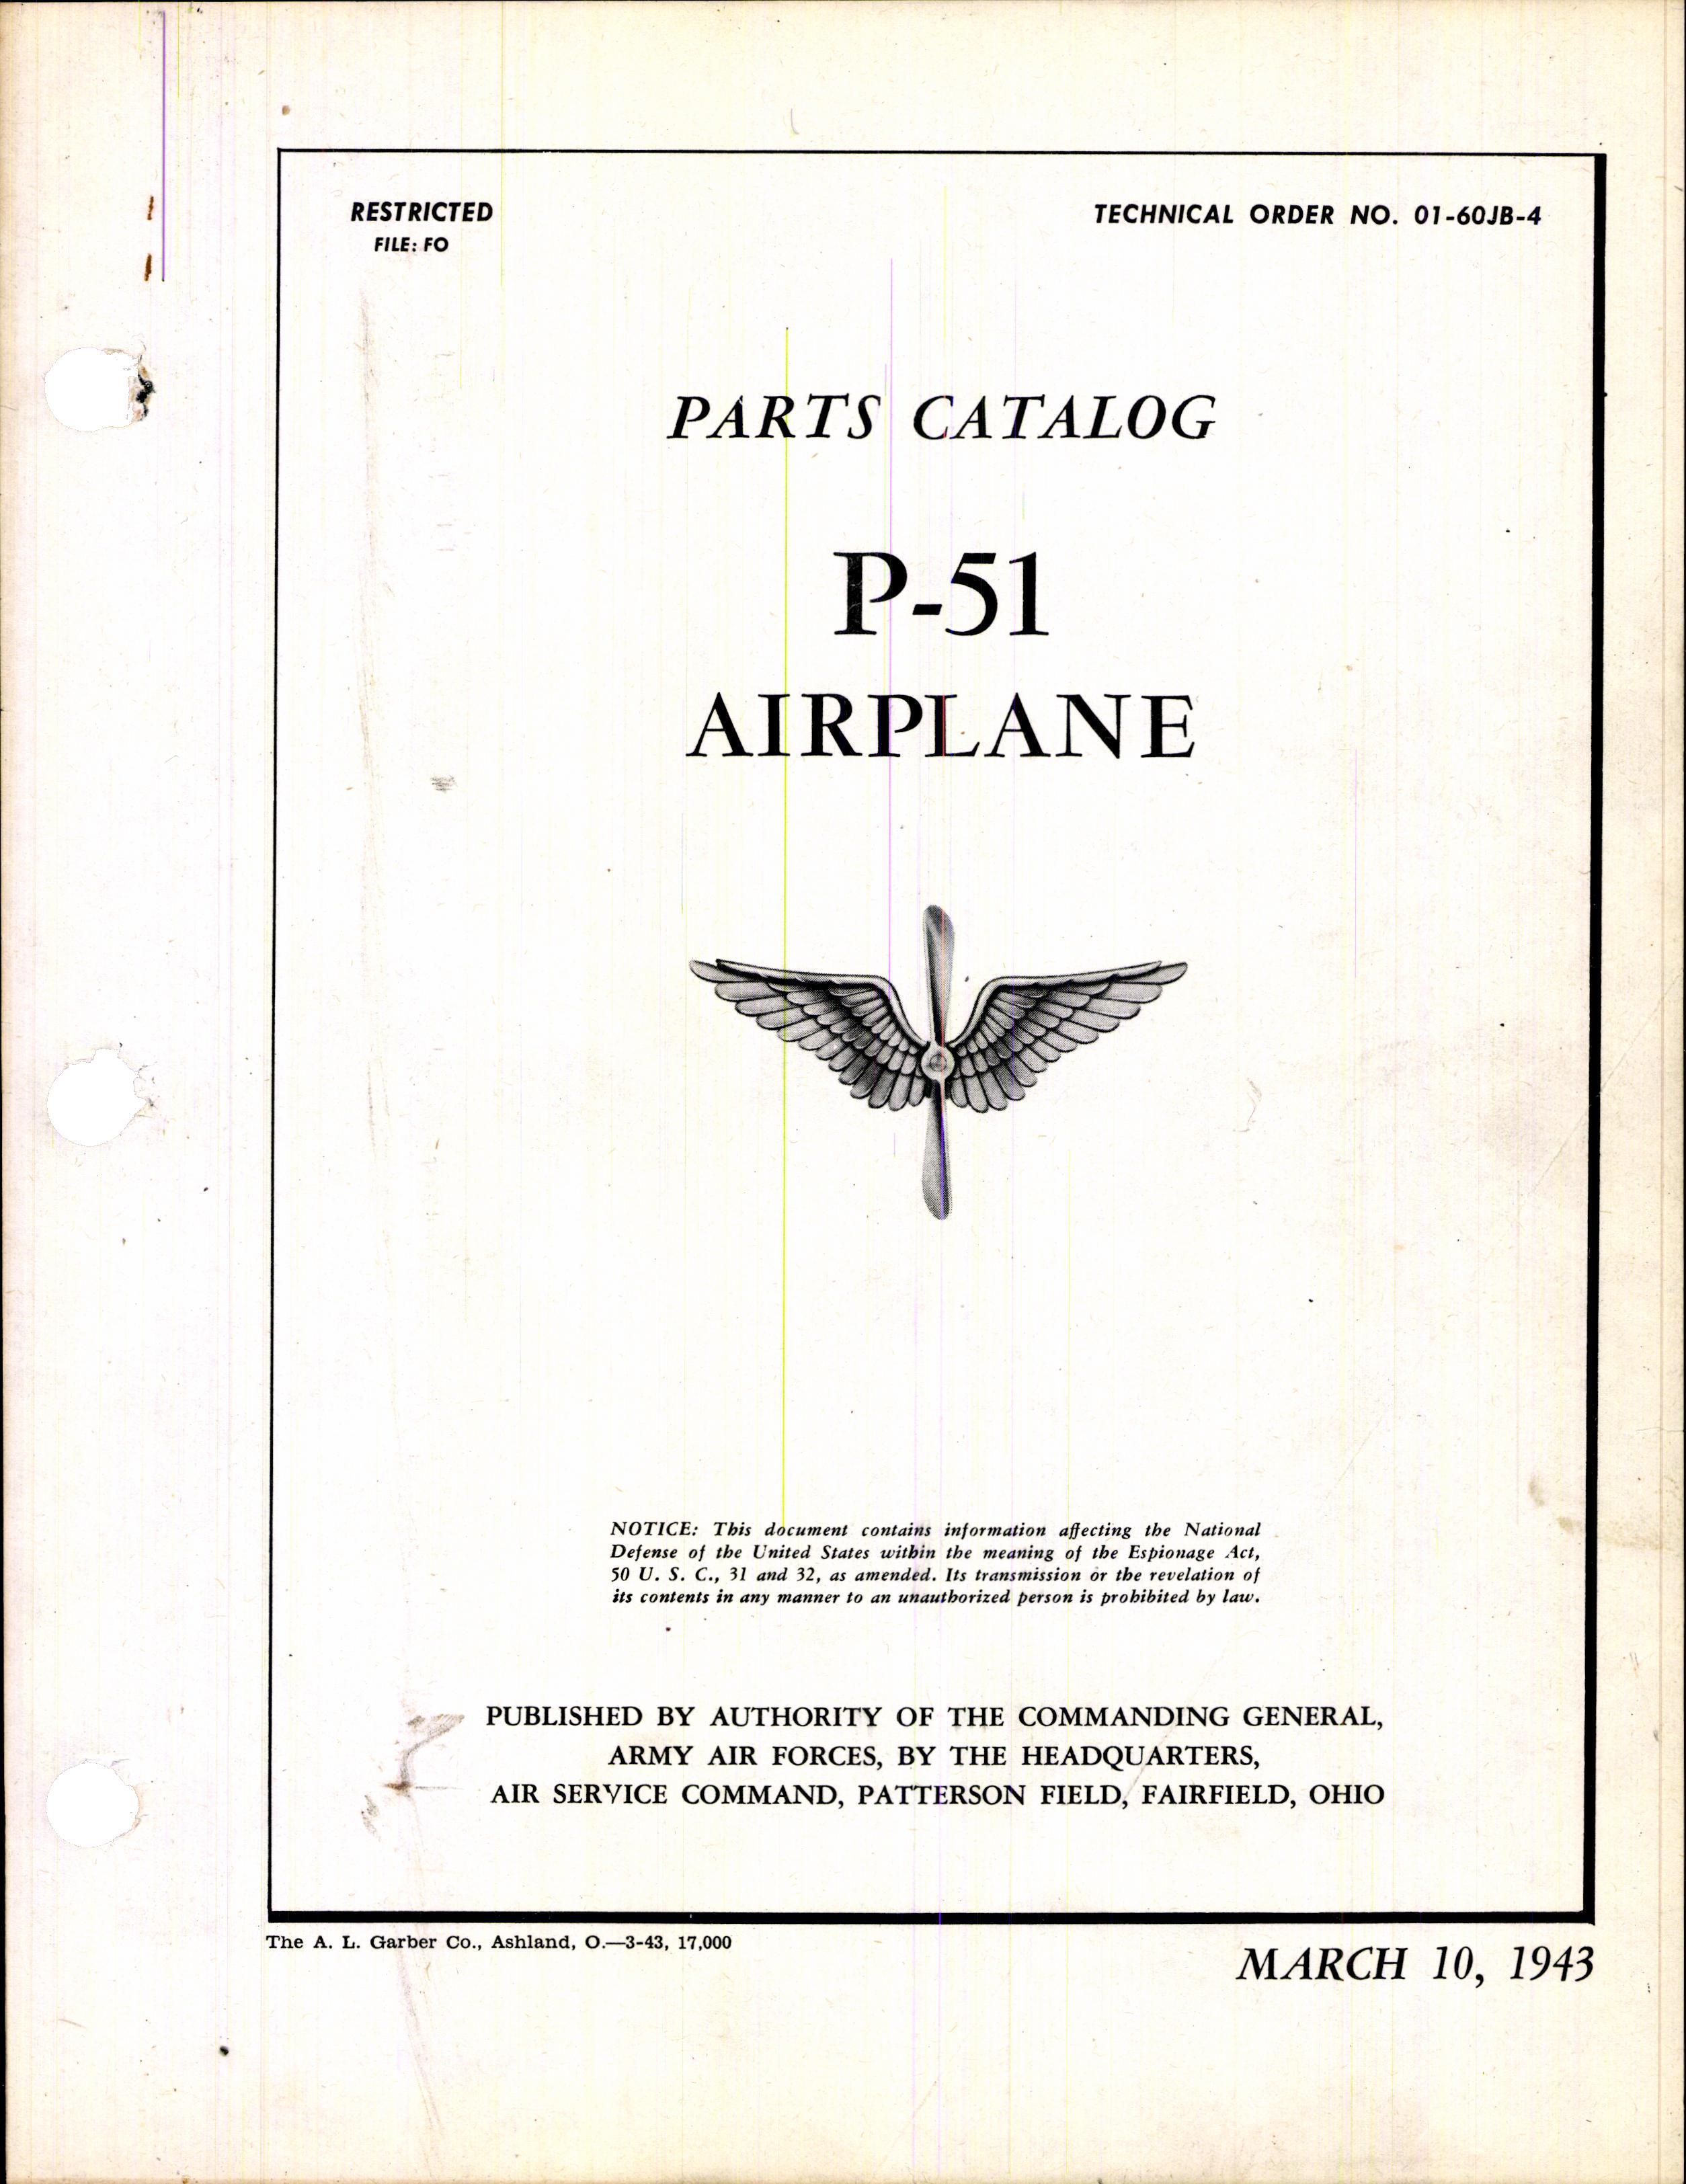 Sample page 1 from AirCorps Library document: Parts Catalog for P-51 Airplane